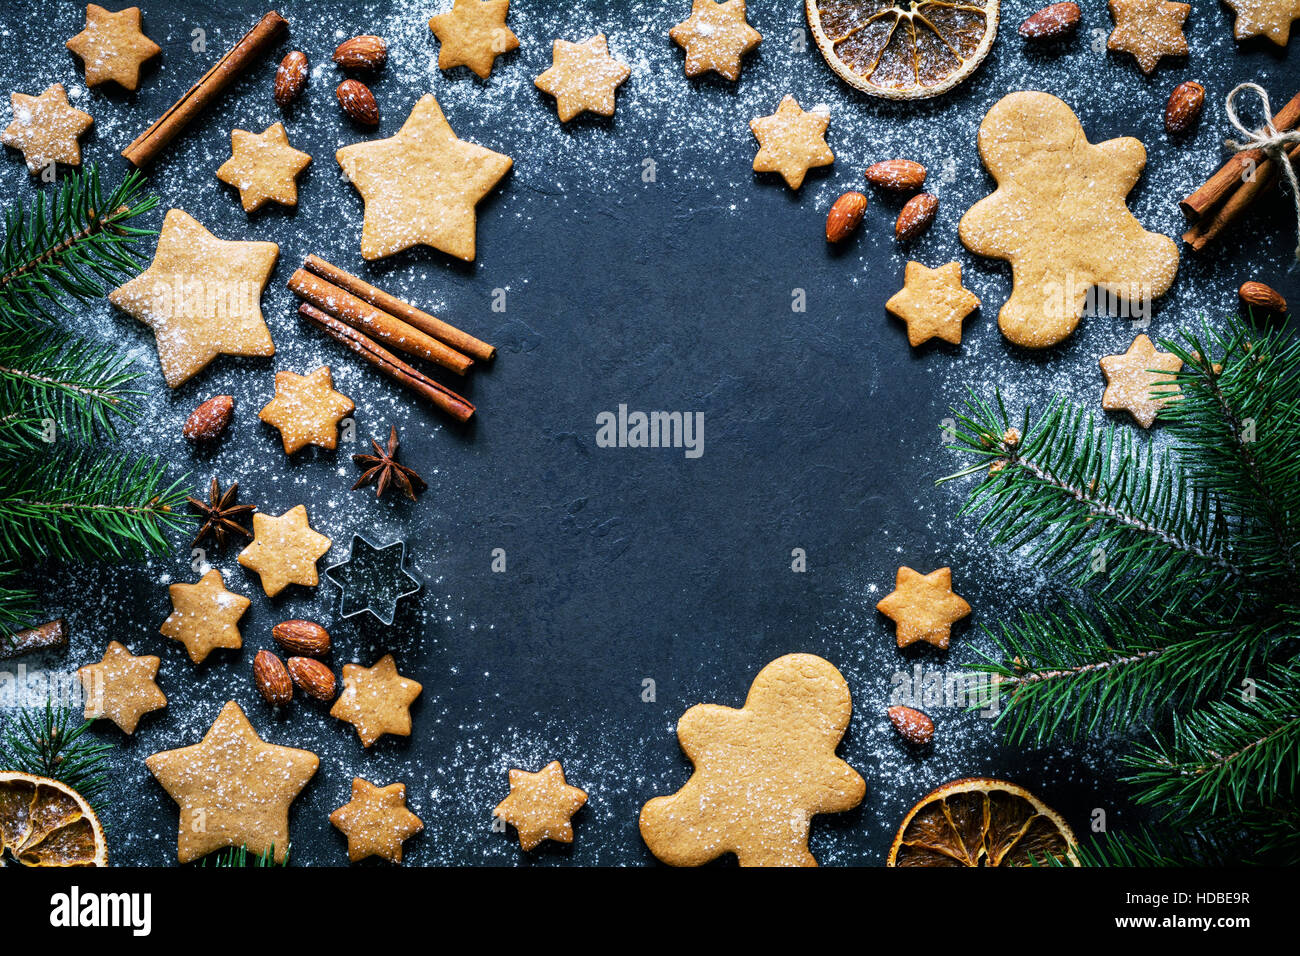 Christmas or New Year background with gingerbread cookies, gingerbread man cookies, stars, spices, cinnamon and fir tree Stock Photo